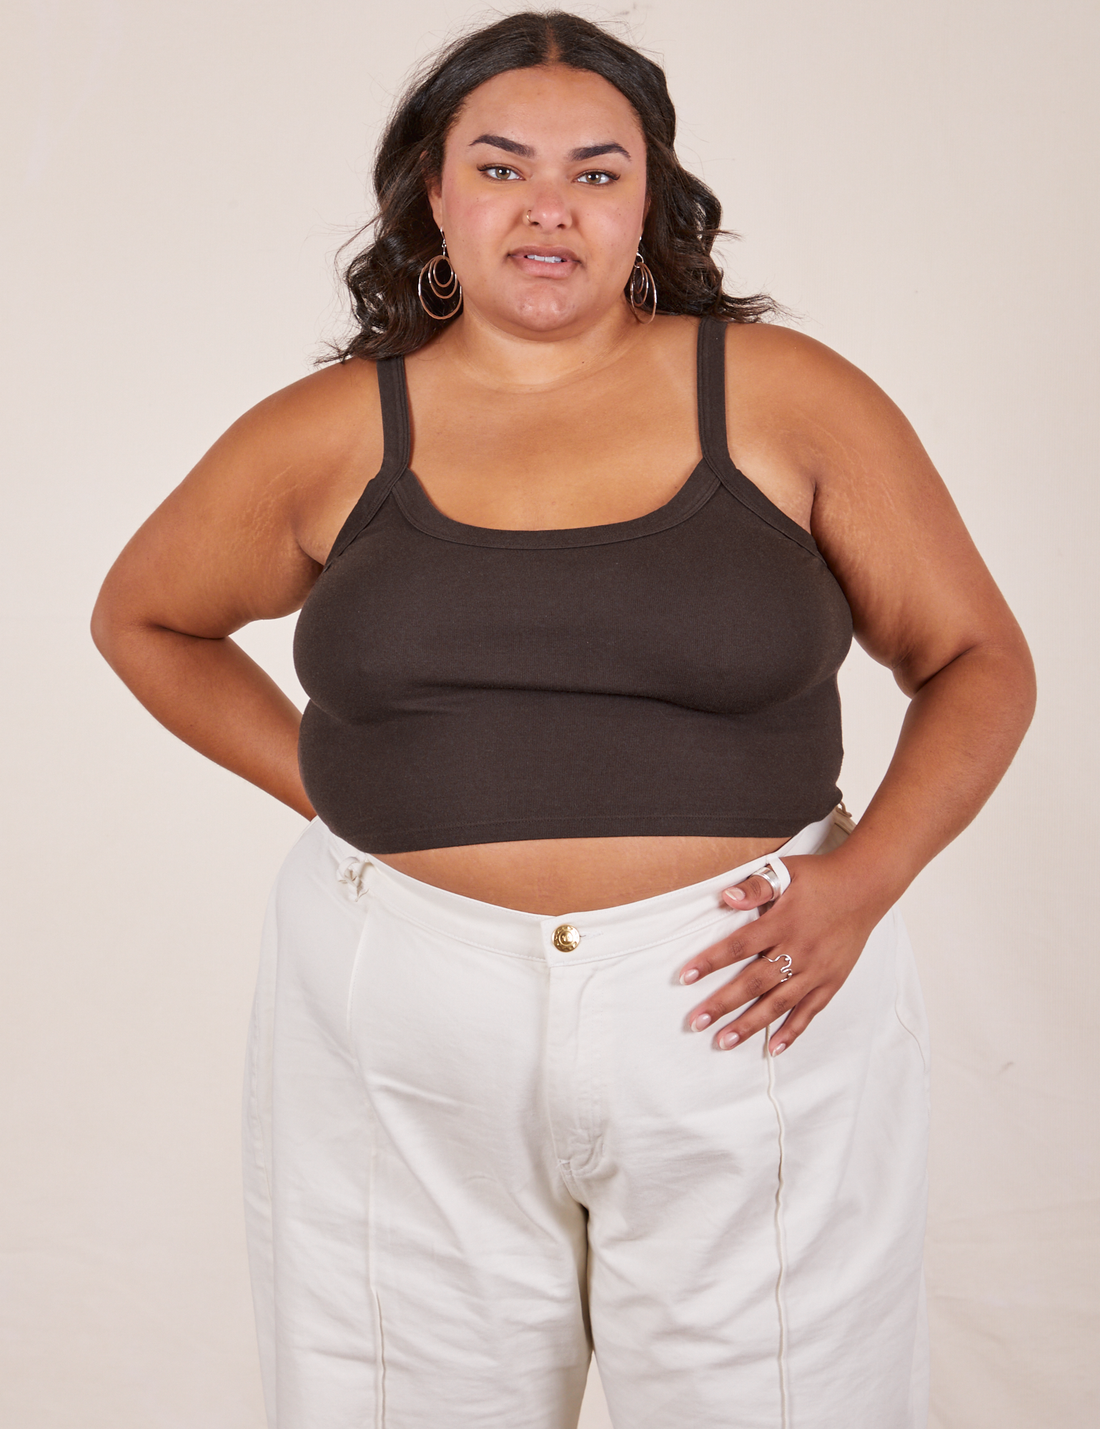 Alicia is 5'9" and wearing XL Cropped Cami in Espresso Brown paired with vintage off-white Western Pants